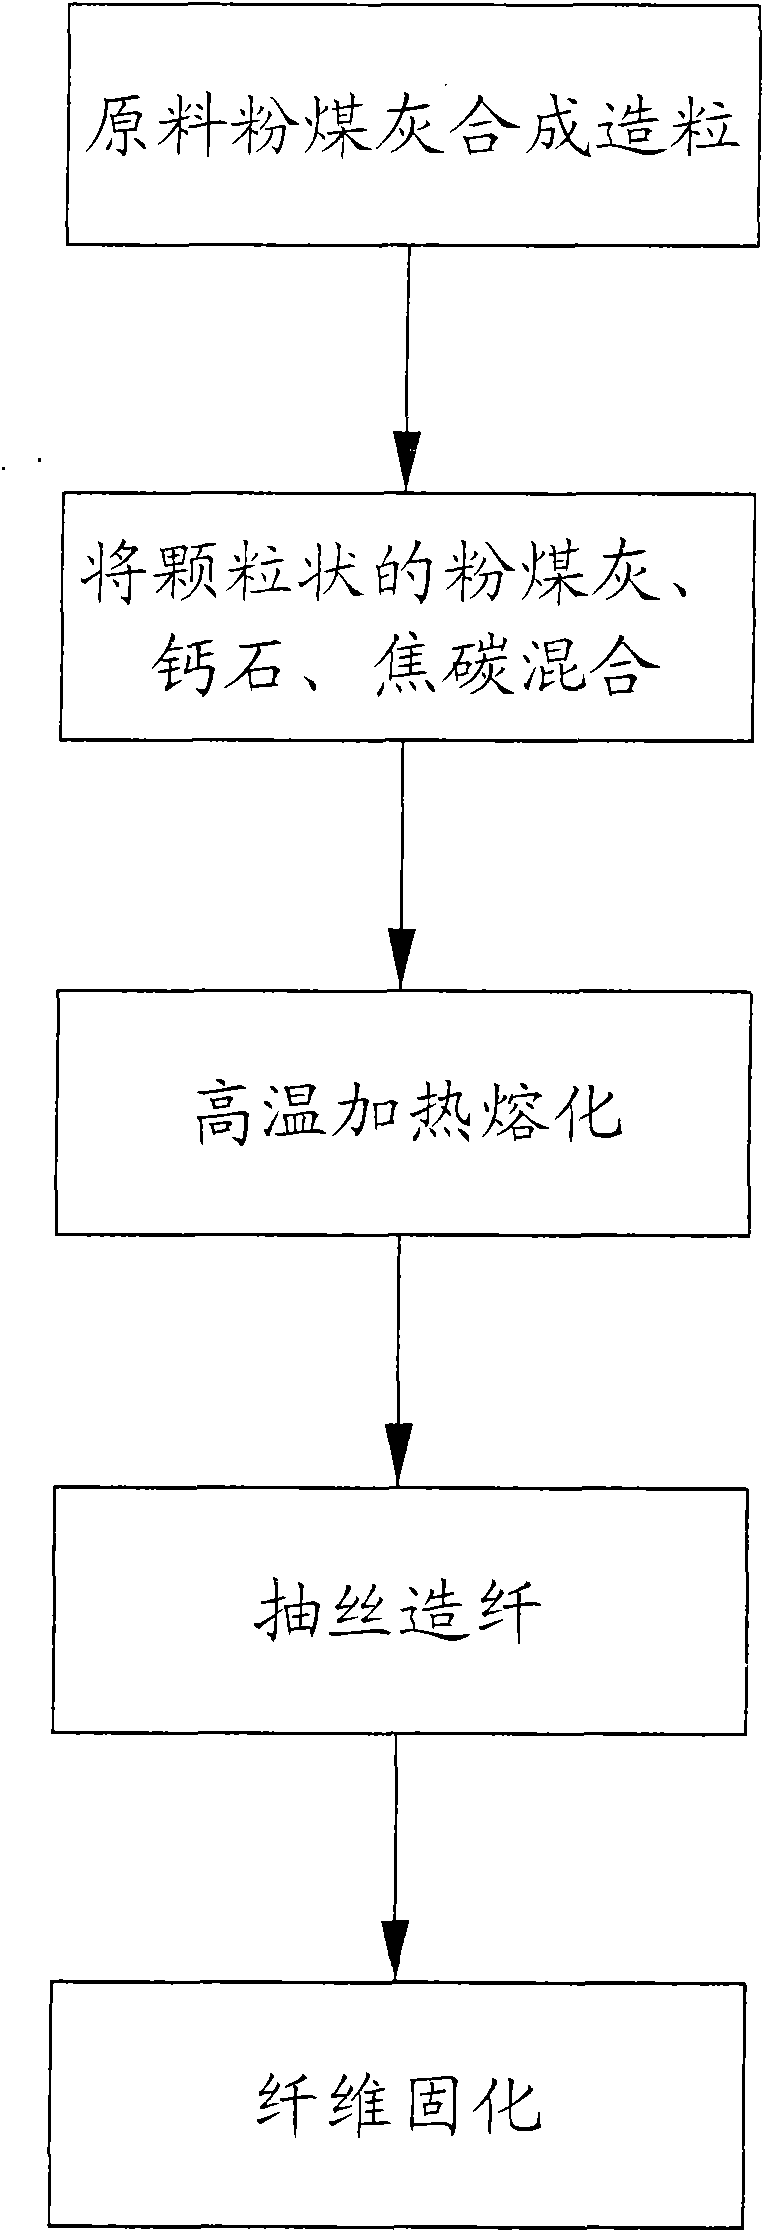 Method for producing cellucotton by using fly ash